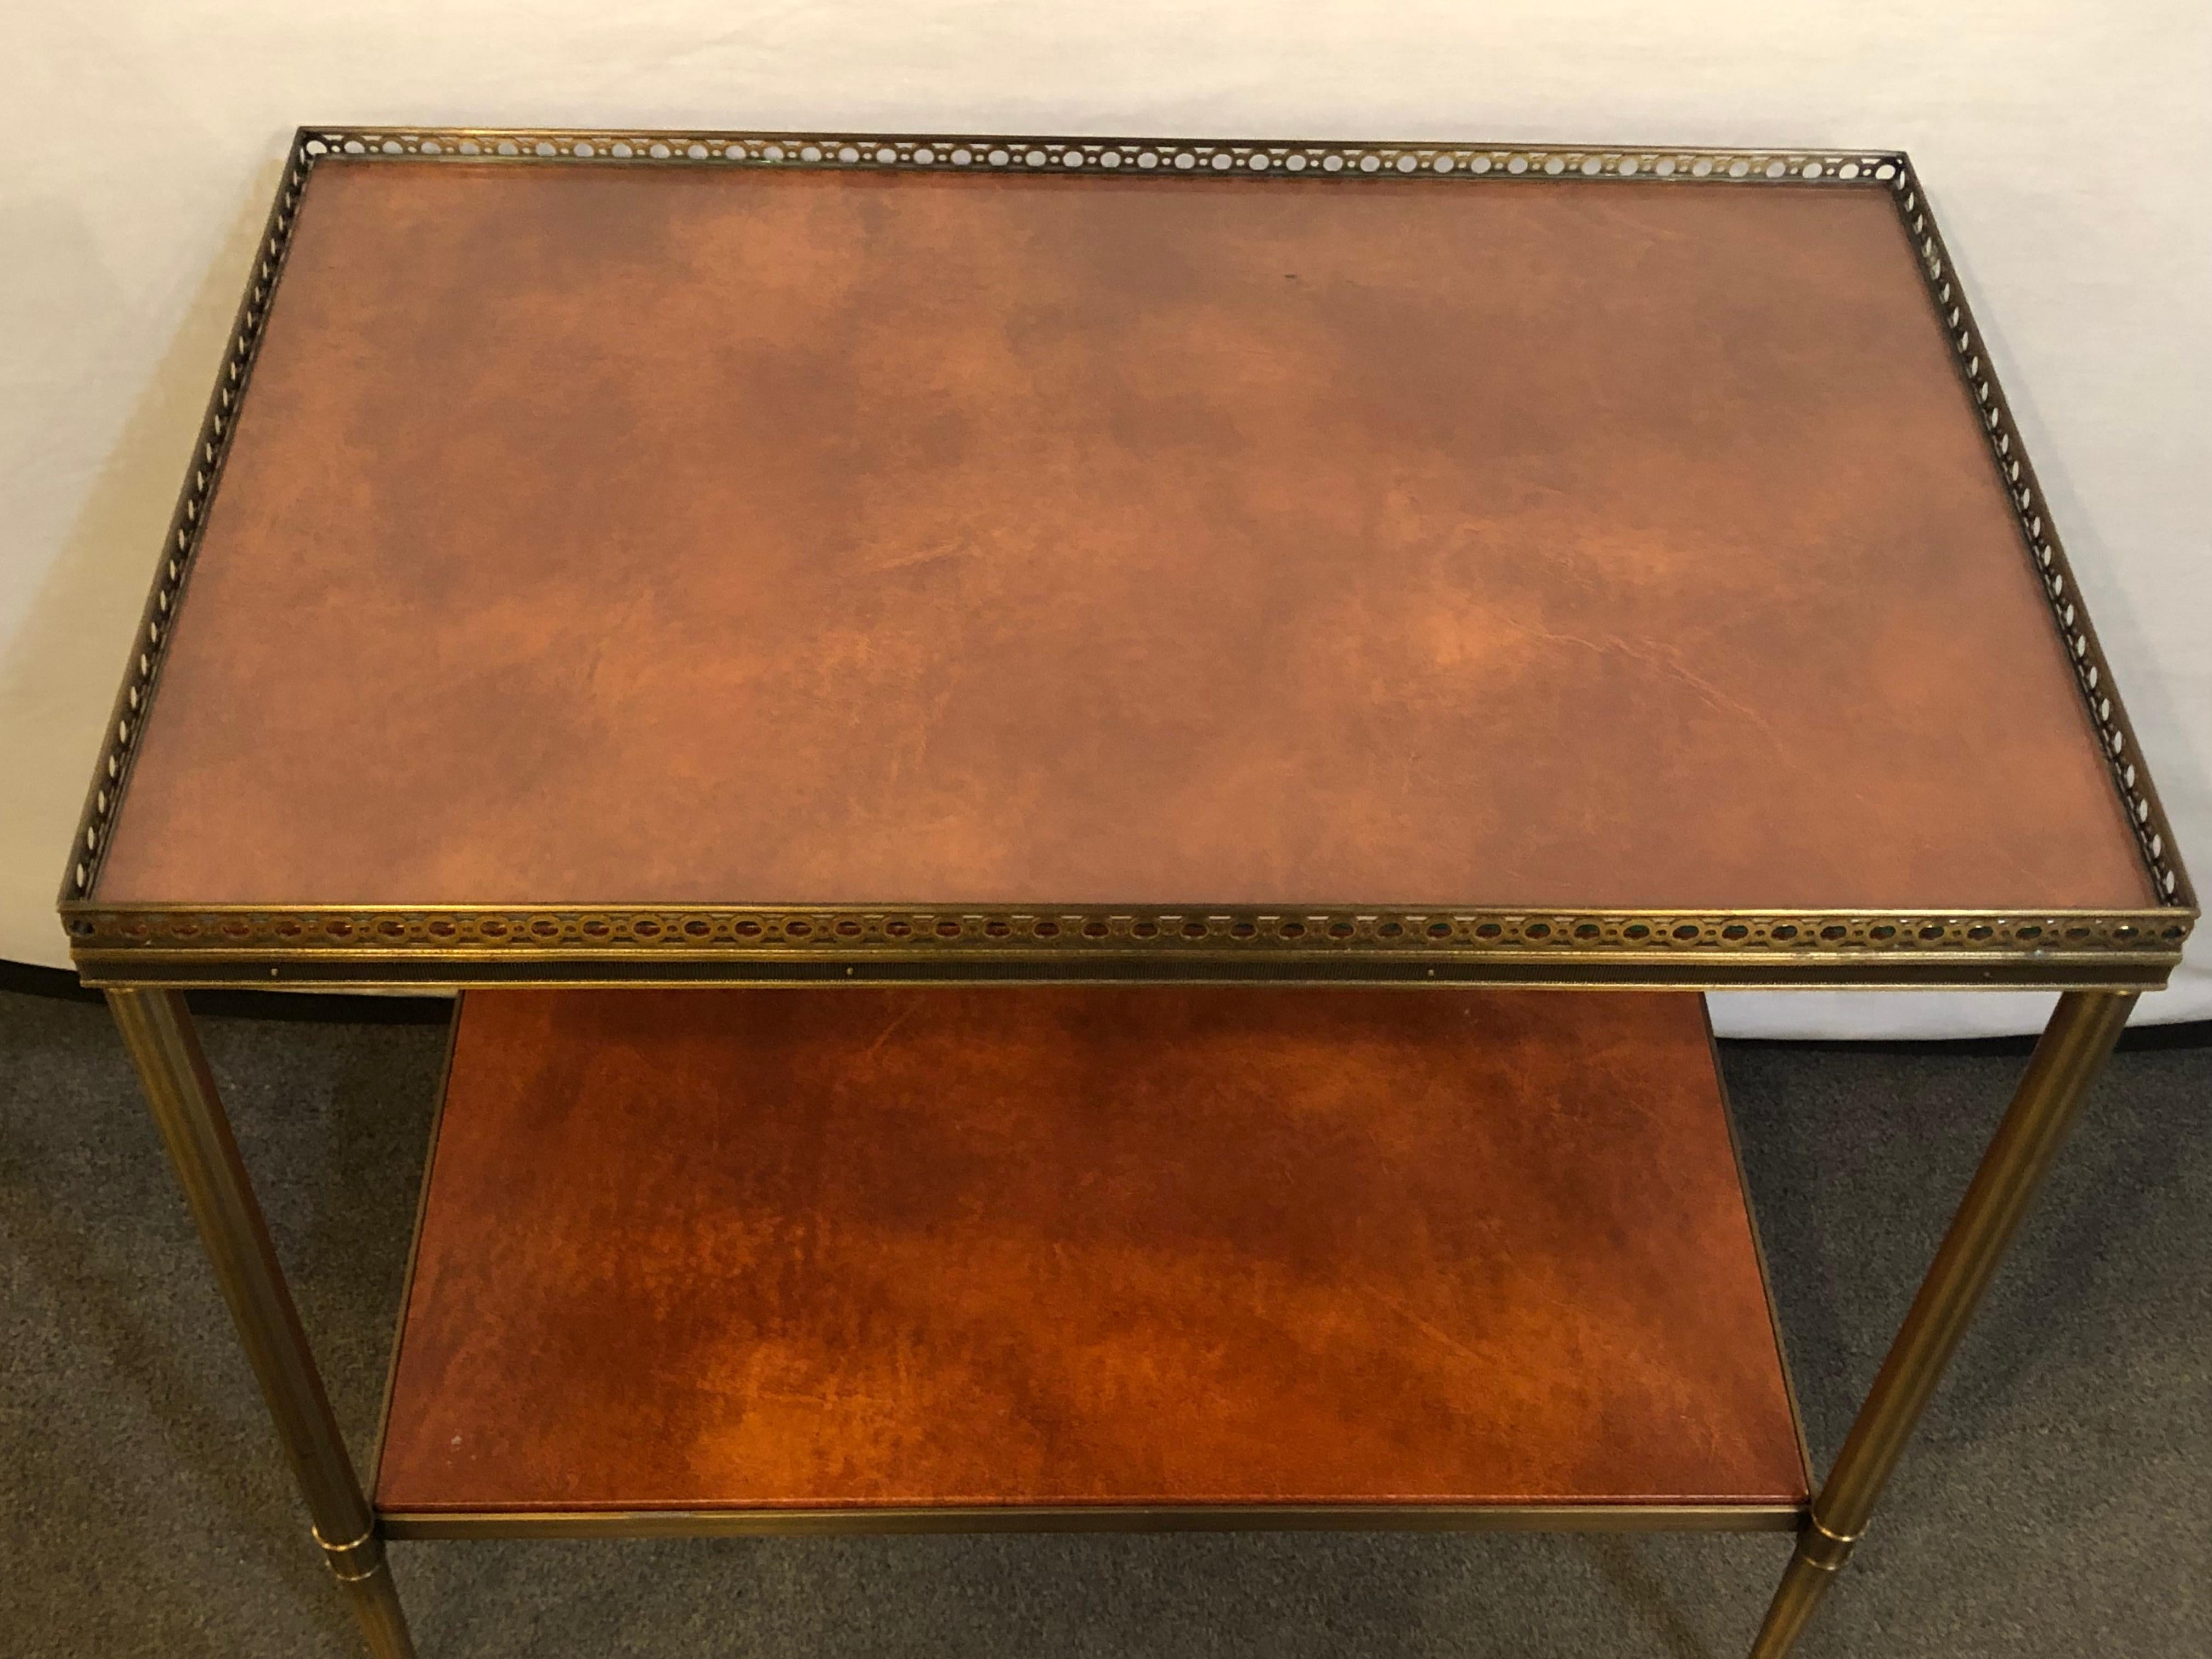 Hollywood Regency Leather Top Baguès Style End Tables by John Boone with Tortoise Shell Form Top